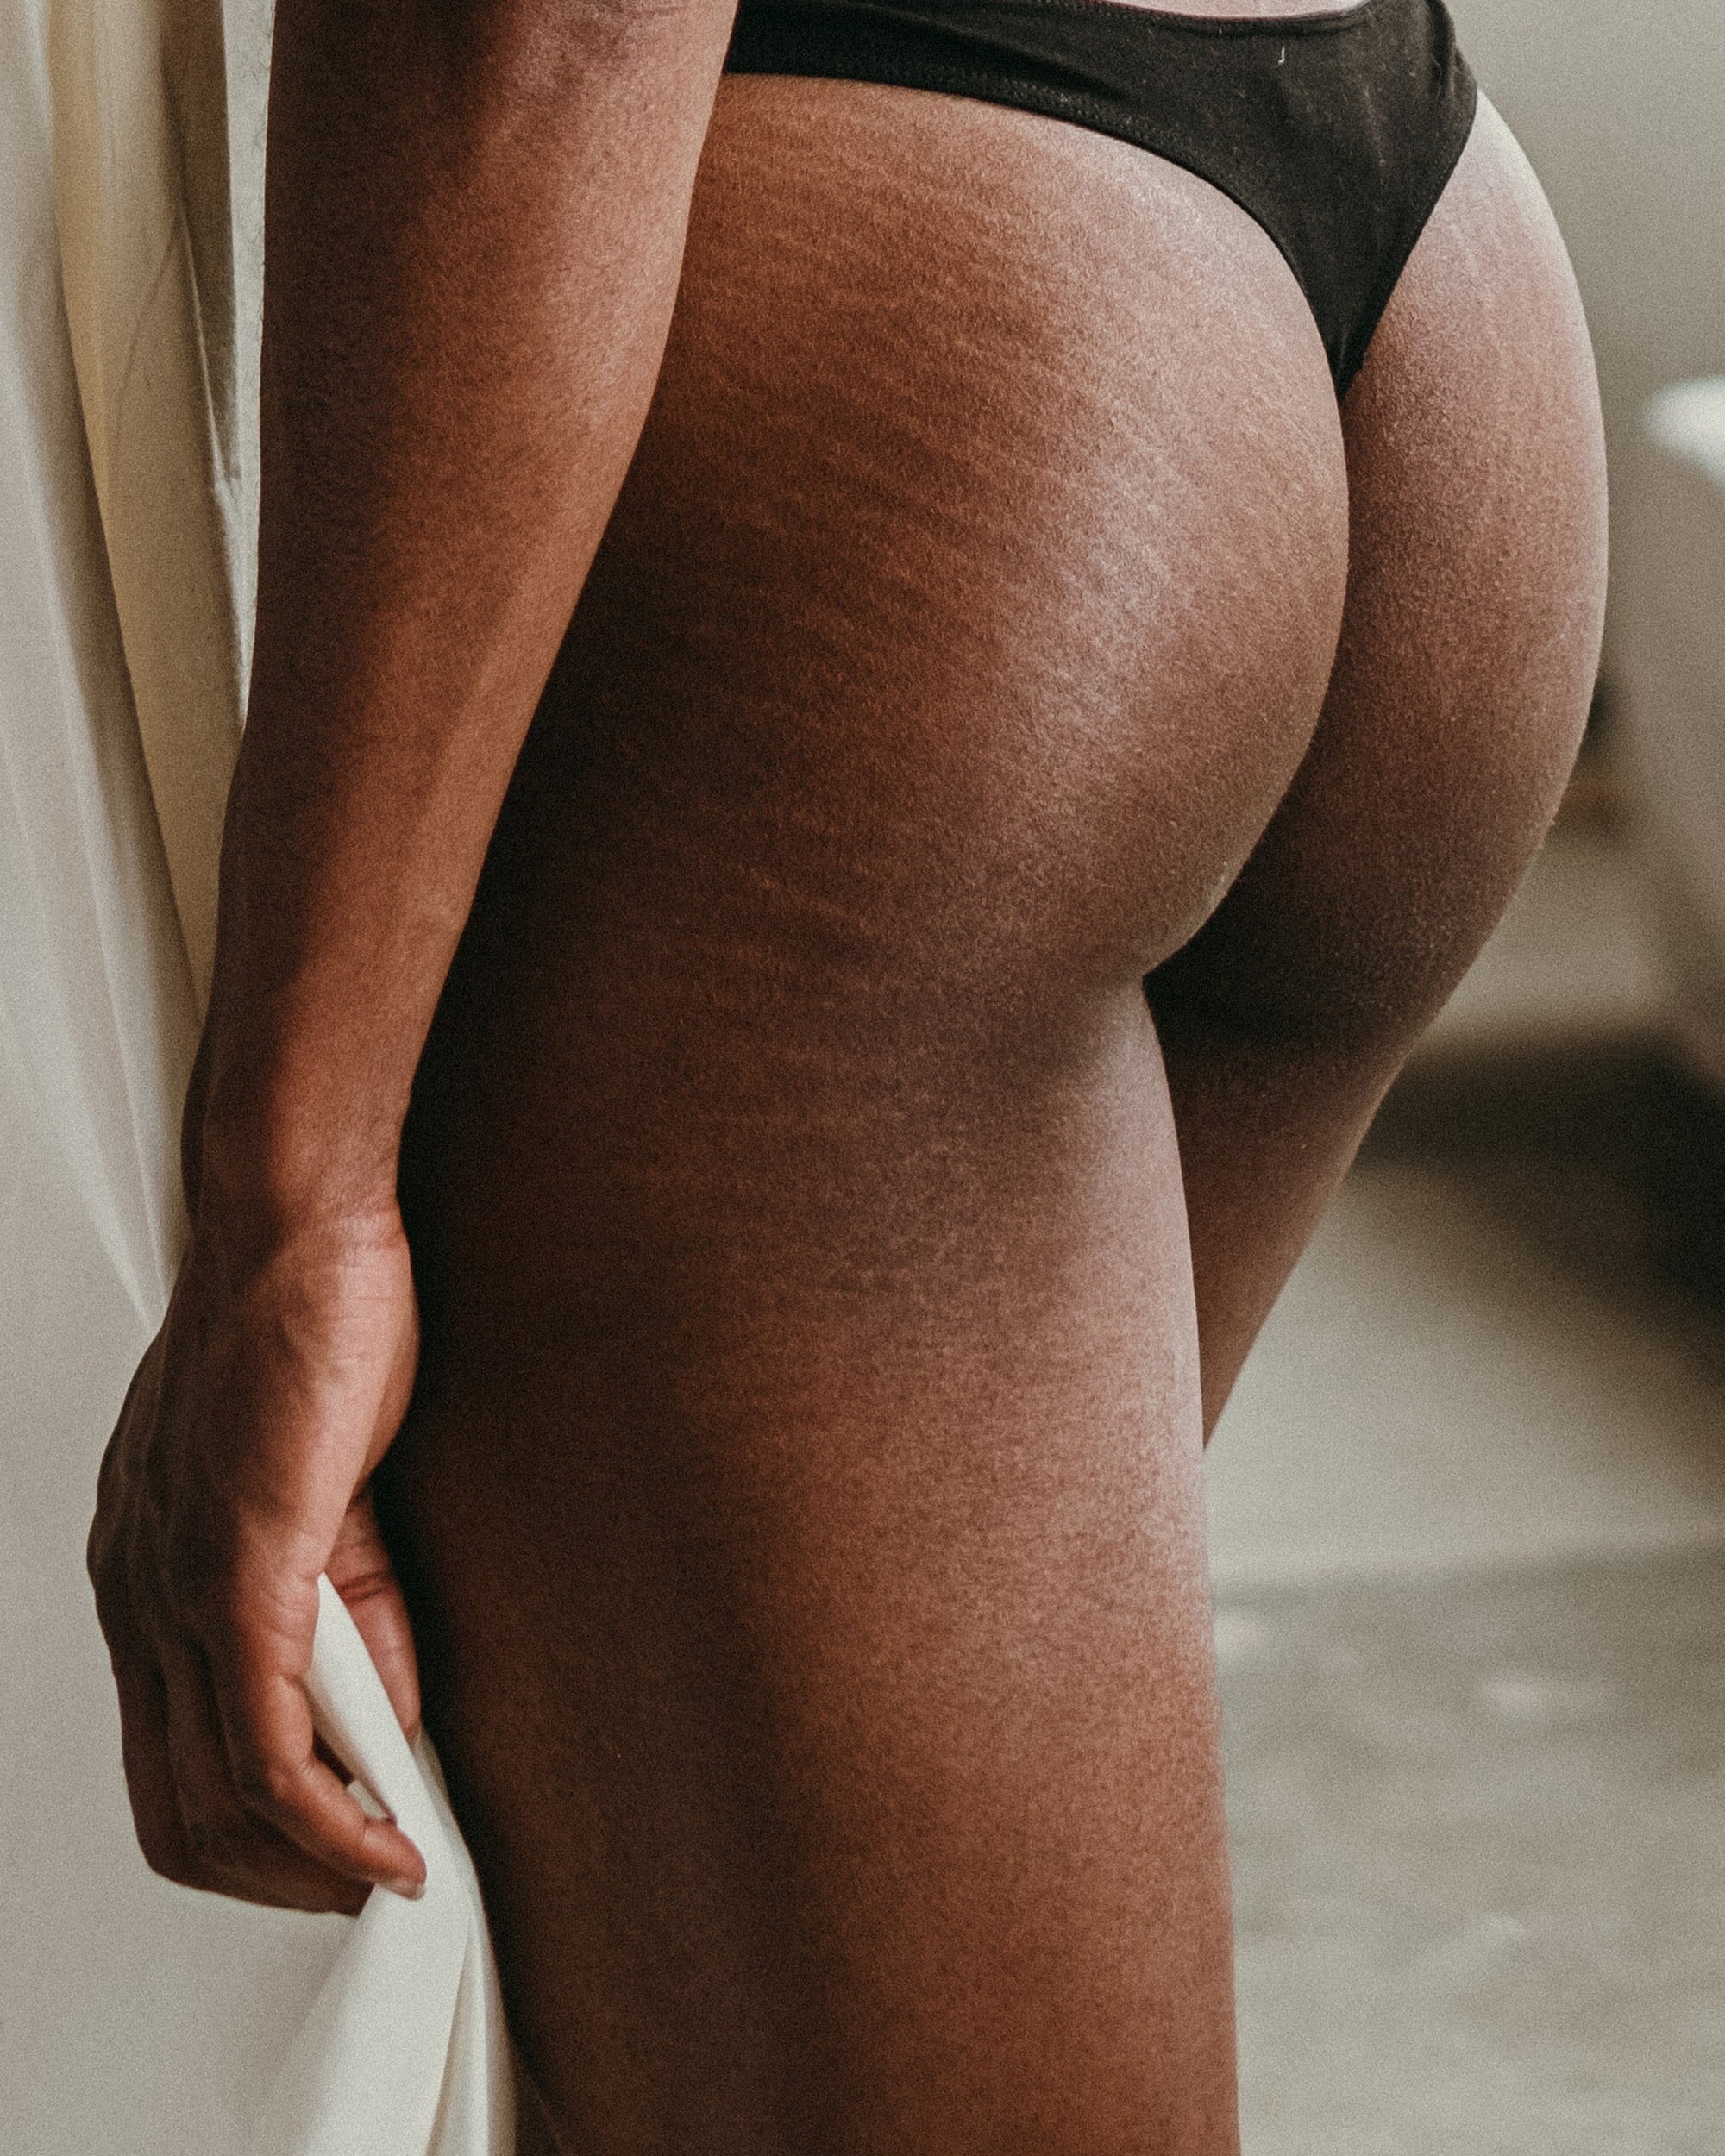 Stretch marks are not exclusive to the stomach or to pregnancy.